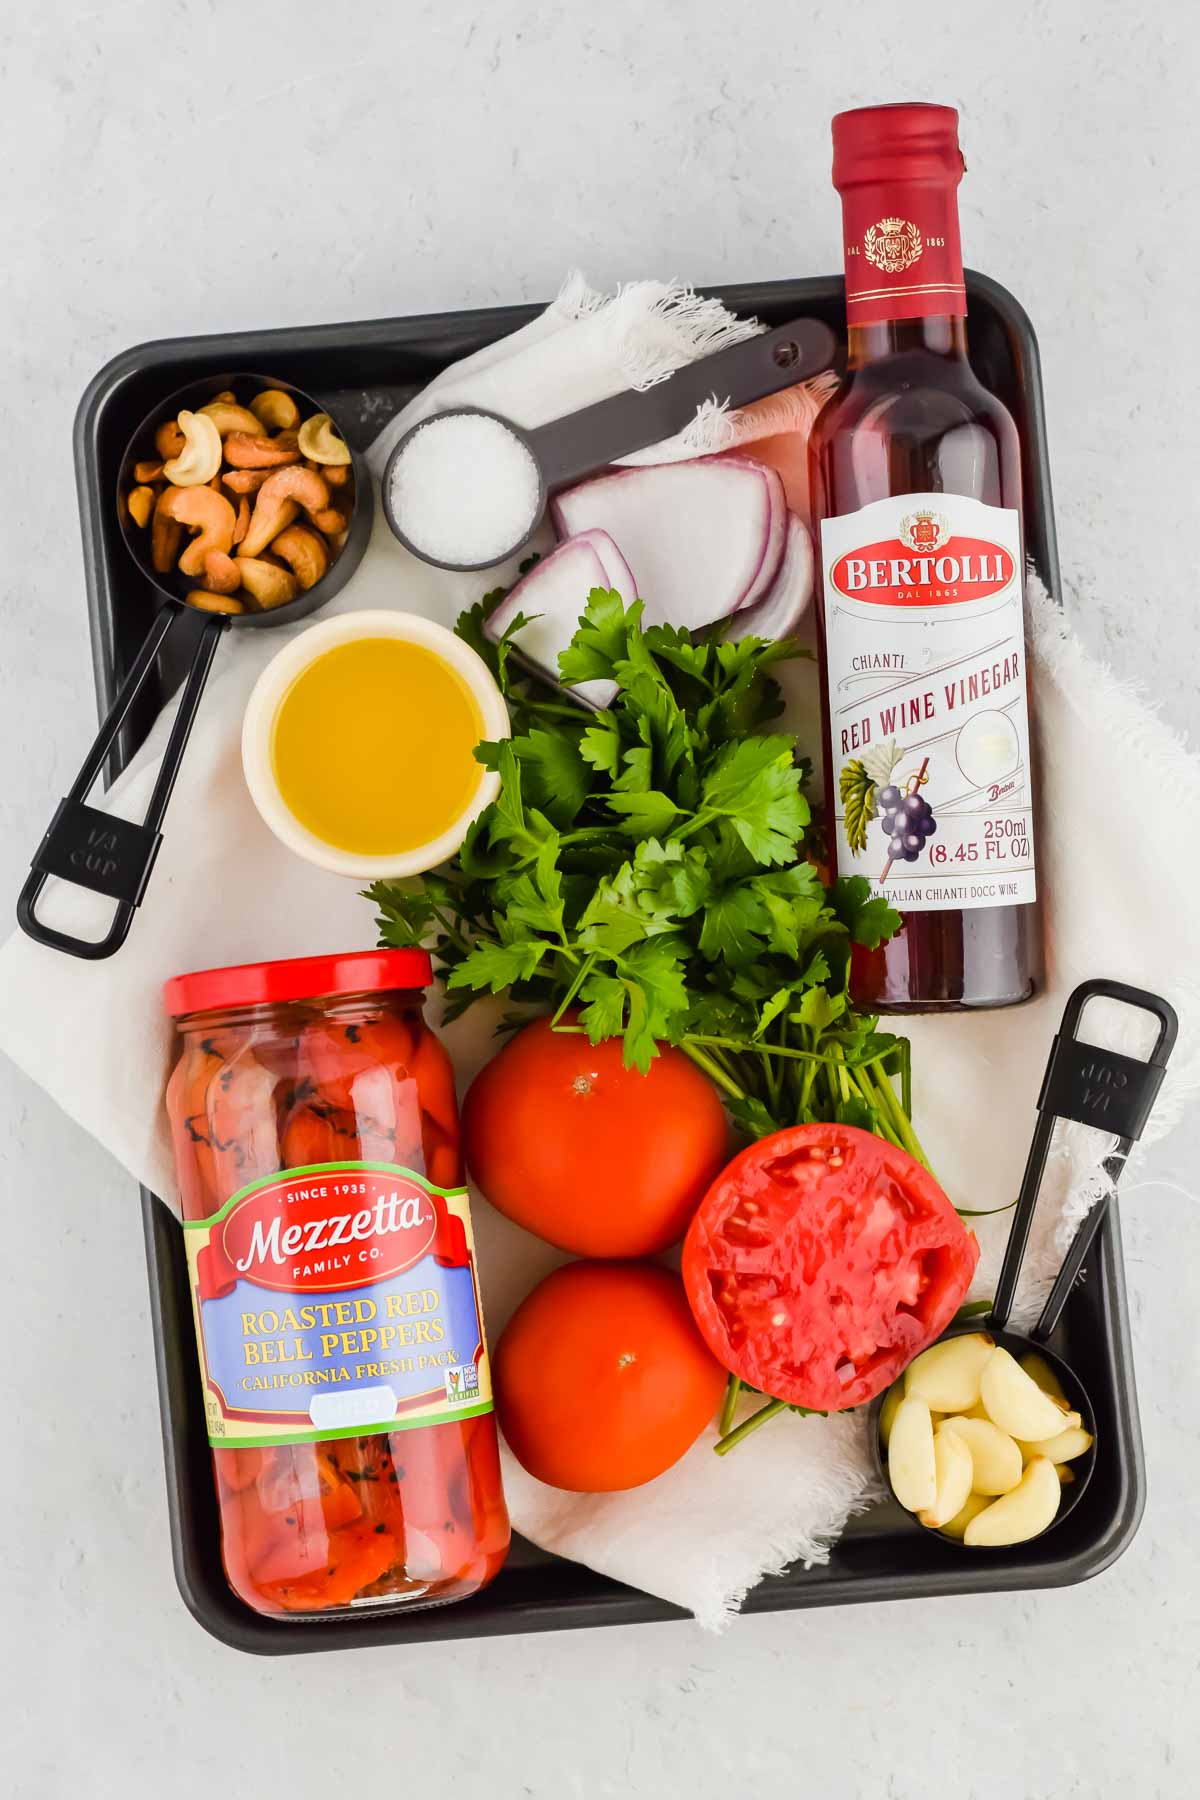 sheet pan tray that has all of the romesco dip ingredients on it.